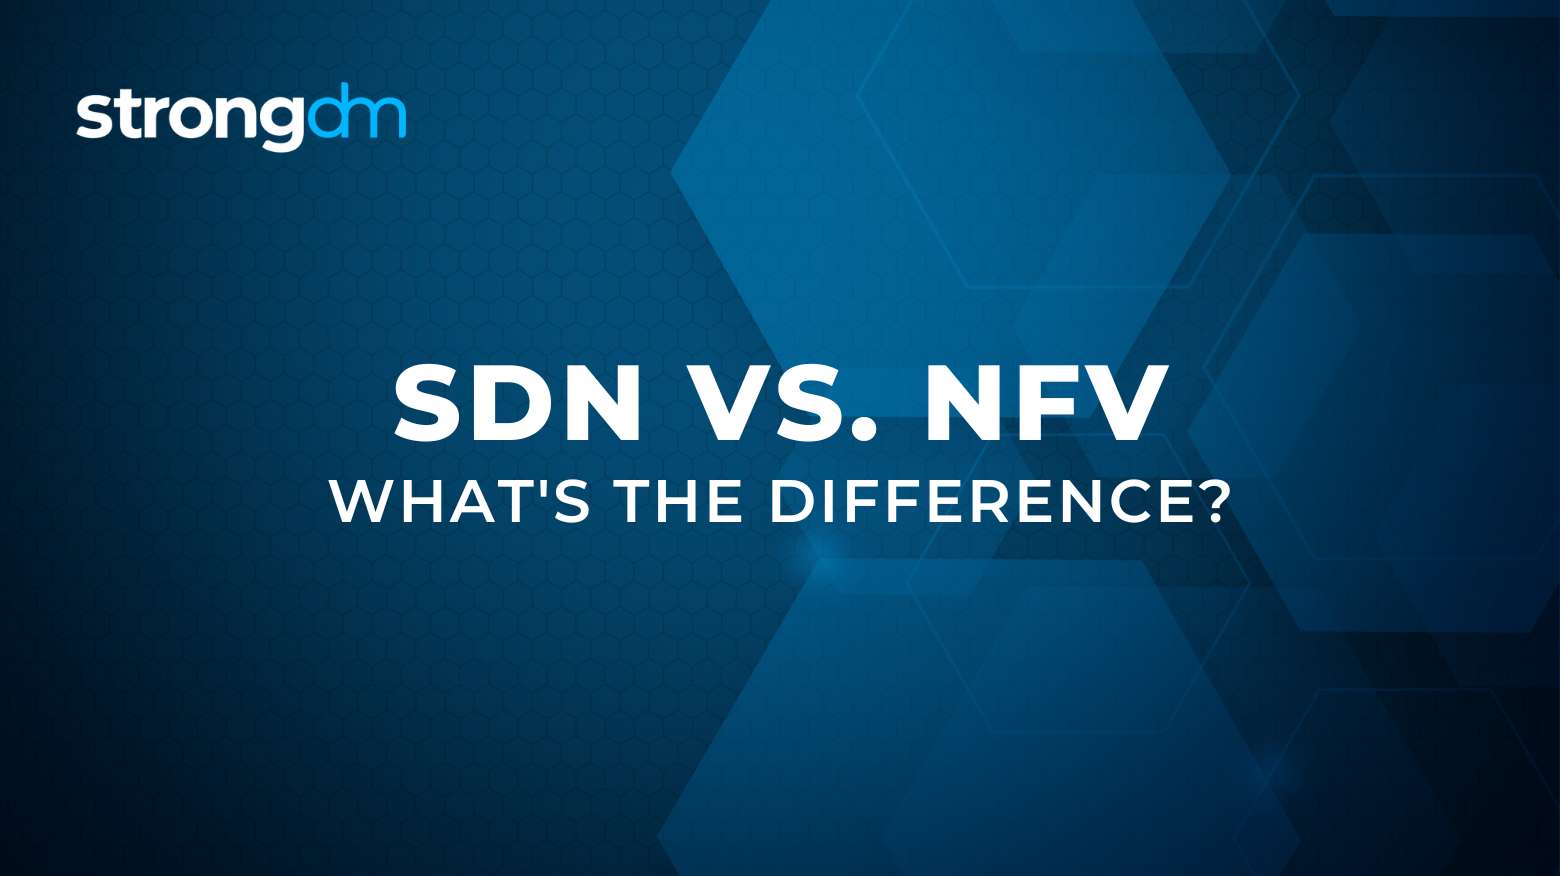 Comparing SDN and NFV: What's the Difference?